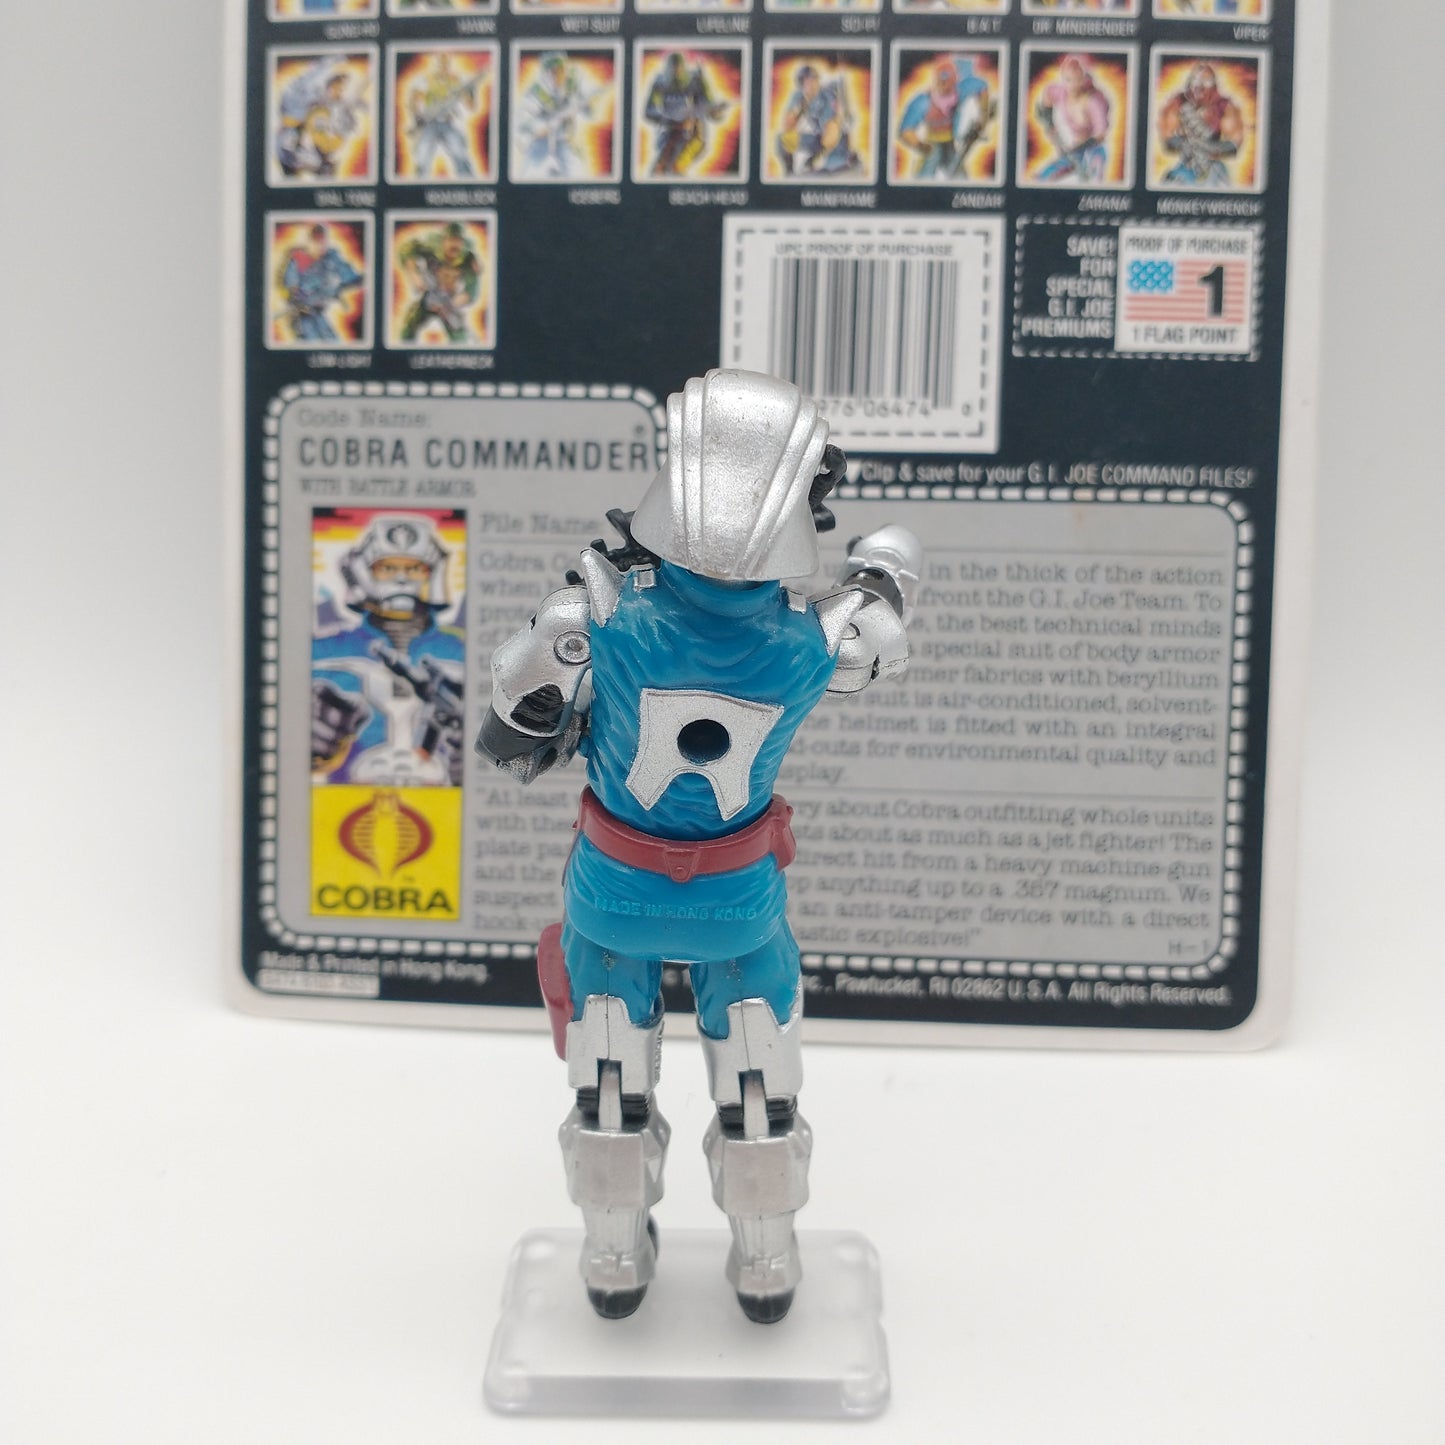 The action figure from behind